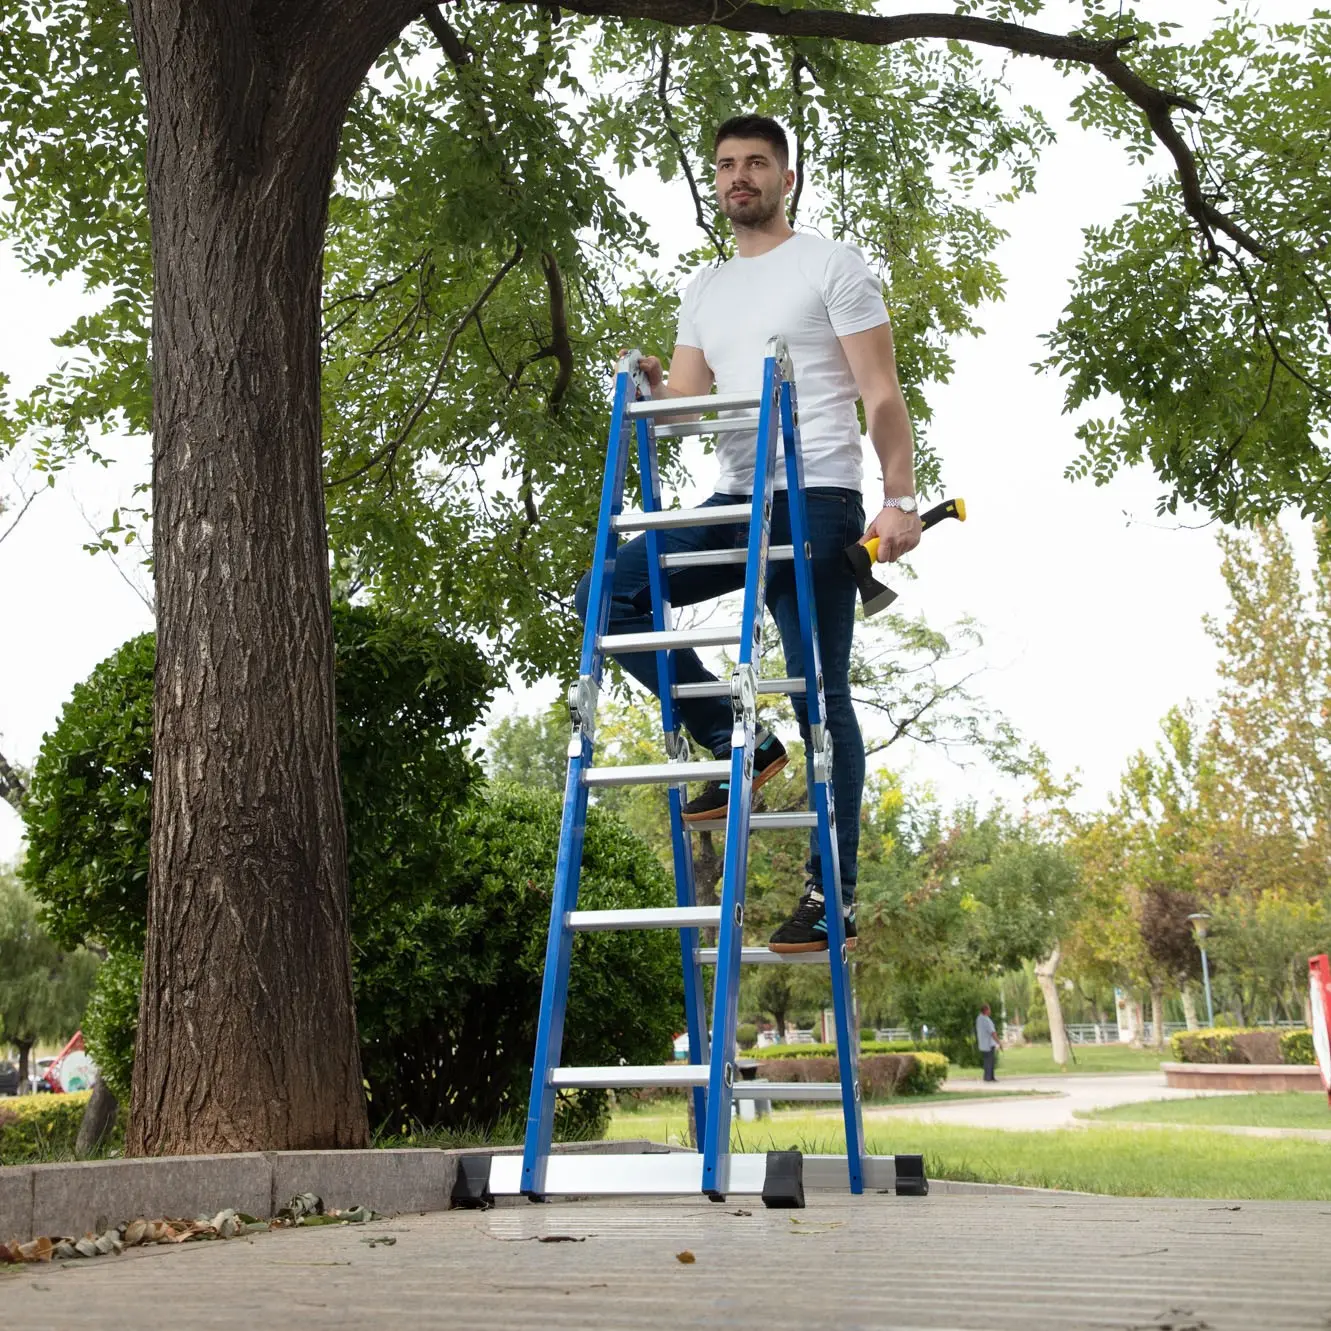 What is the best ladder for home use?